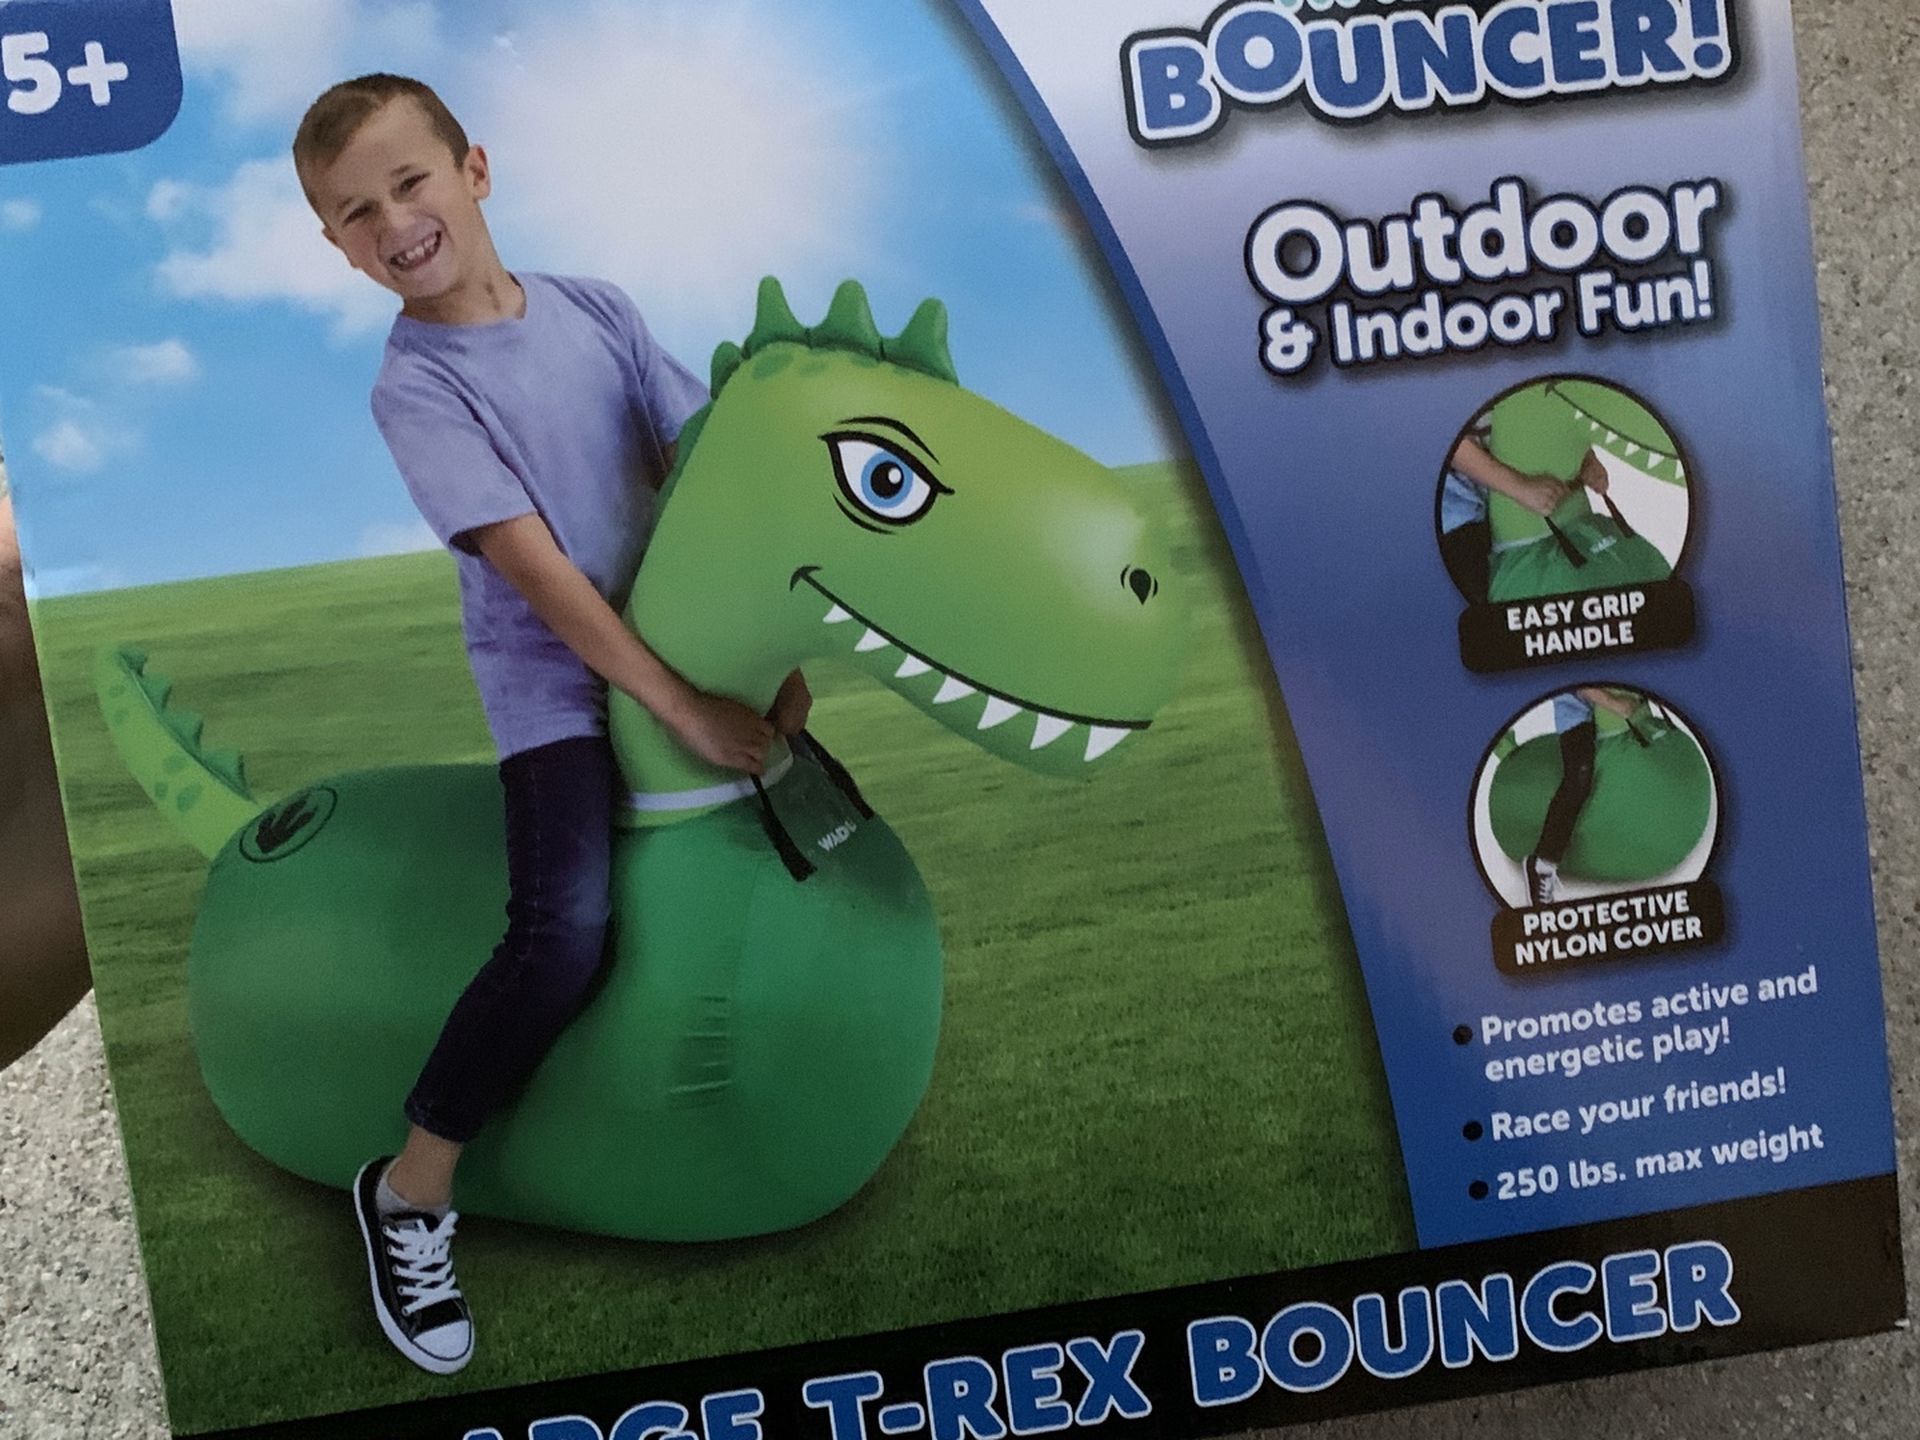 Waddle Bouncer - Large Dinosaur T-Rex Inflateable Bounce Toy - Brand New - Holds Up To 250lbs Of Weight